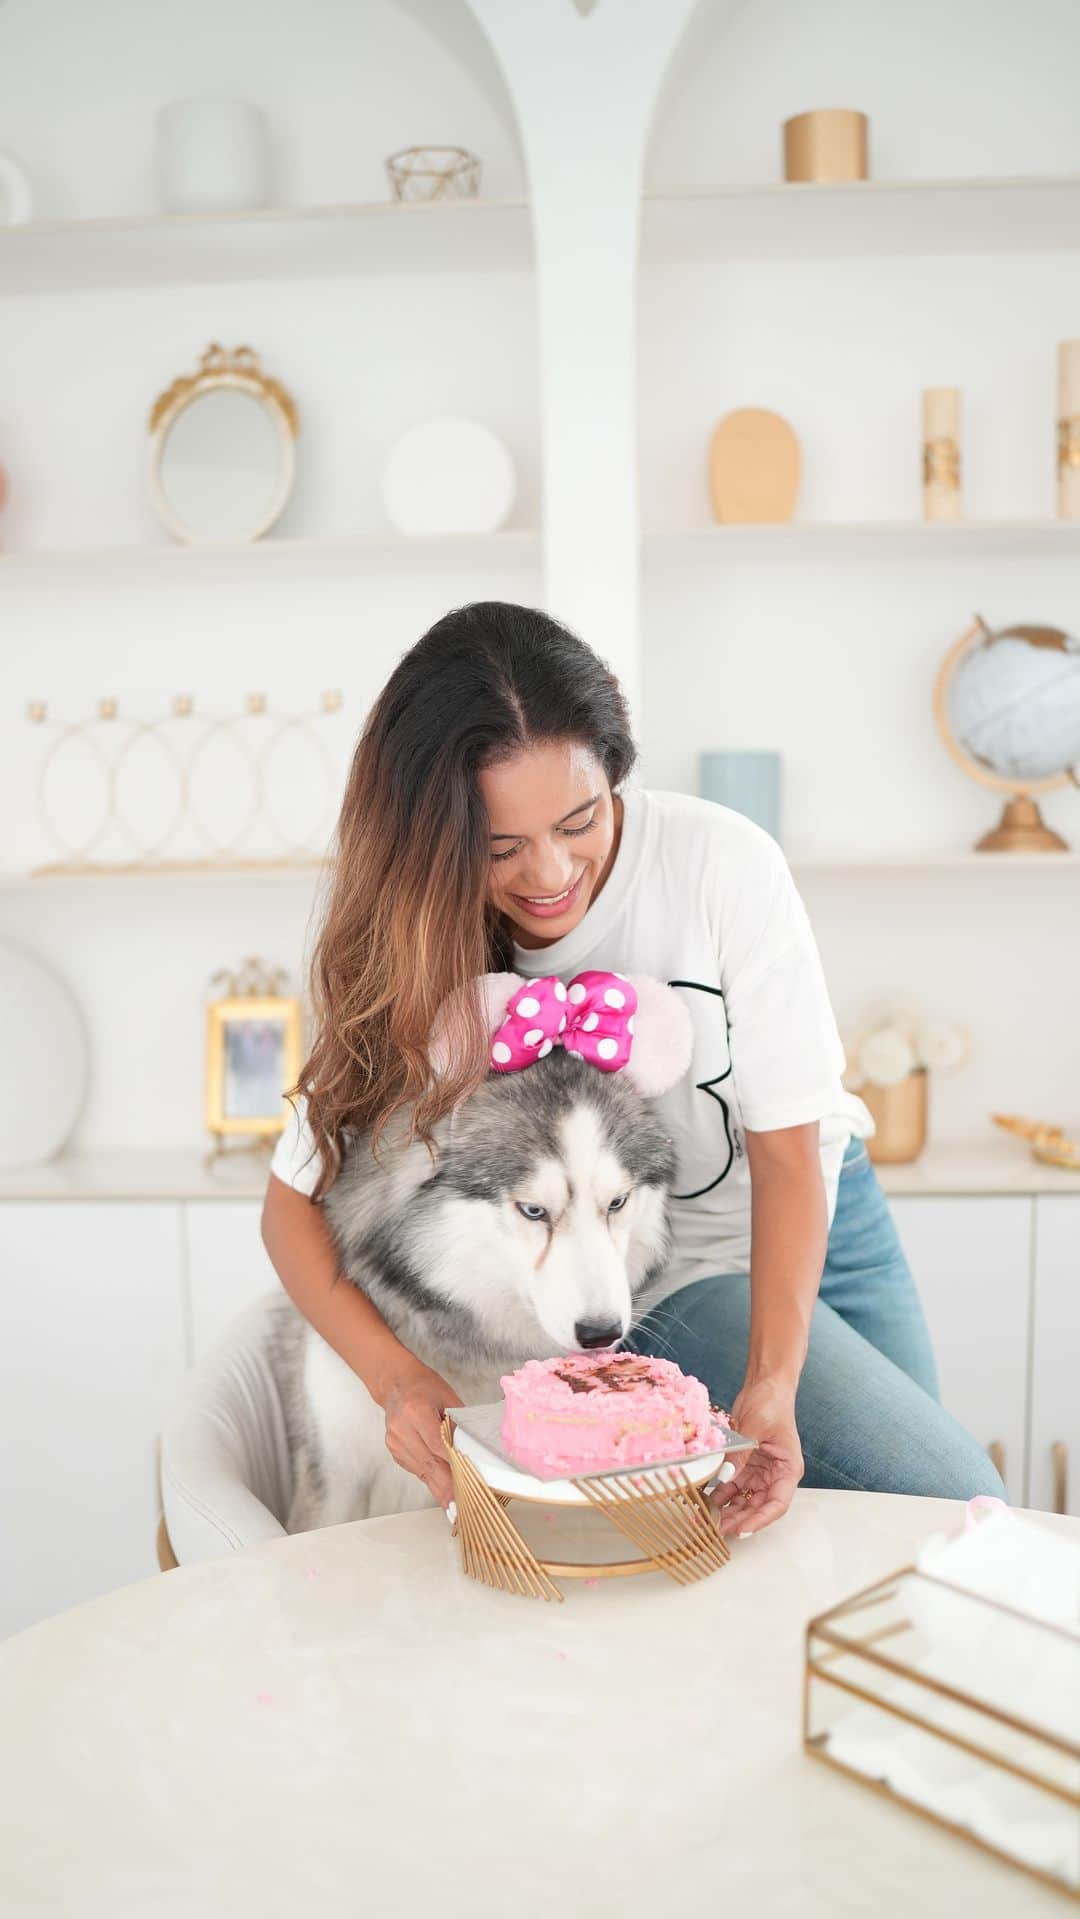 Aakriti Ranaのインスタグラム：「Happy birthday to my cutie! I might not fly down to surprise most of the hoomans in my life but I had to do it for him 😋 Shadow came right before we lost mom and this doggo has been such a blessing for all of us. Even while going through so much pain, he made us smile everyday. Forever grateful to god for this little Angel ❤️ Happy 3rd Birthday Shadow! May you be the longest living doggo on earth 🌎   When is your pets birthday and how do you celebrate? Comment below and let me know❤️  #aakritirana #birthdayboy #happybirthday #happiness #dogsofinstagram #family #dogvideos #husky #reelsinstagram #surprise #birthdaysurprise #dogreels」